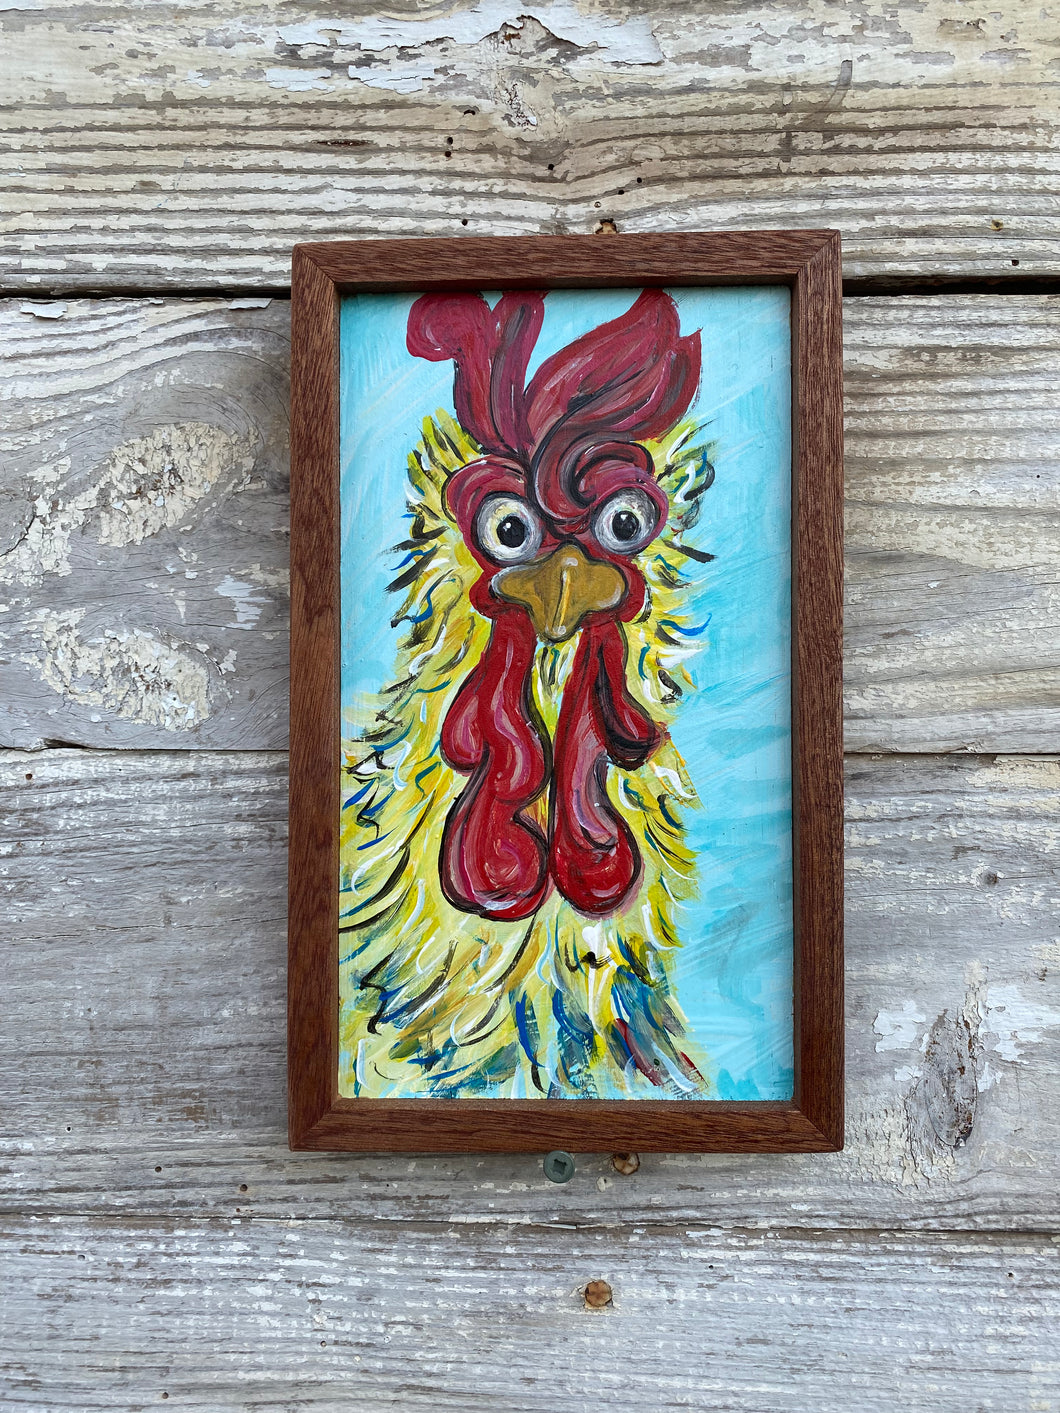 Curious Chicken #6 reclaimed wood painting